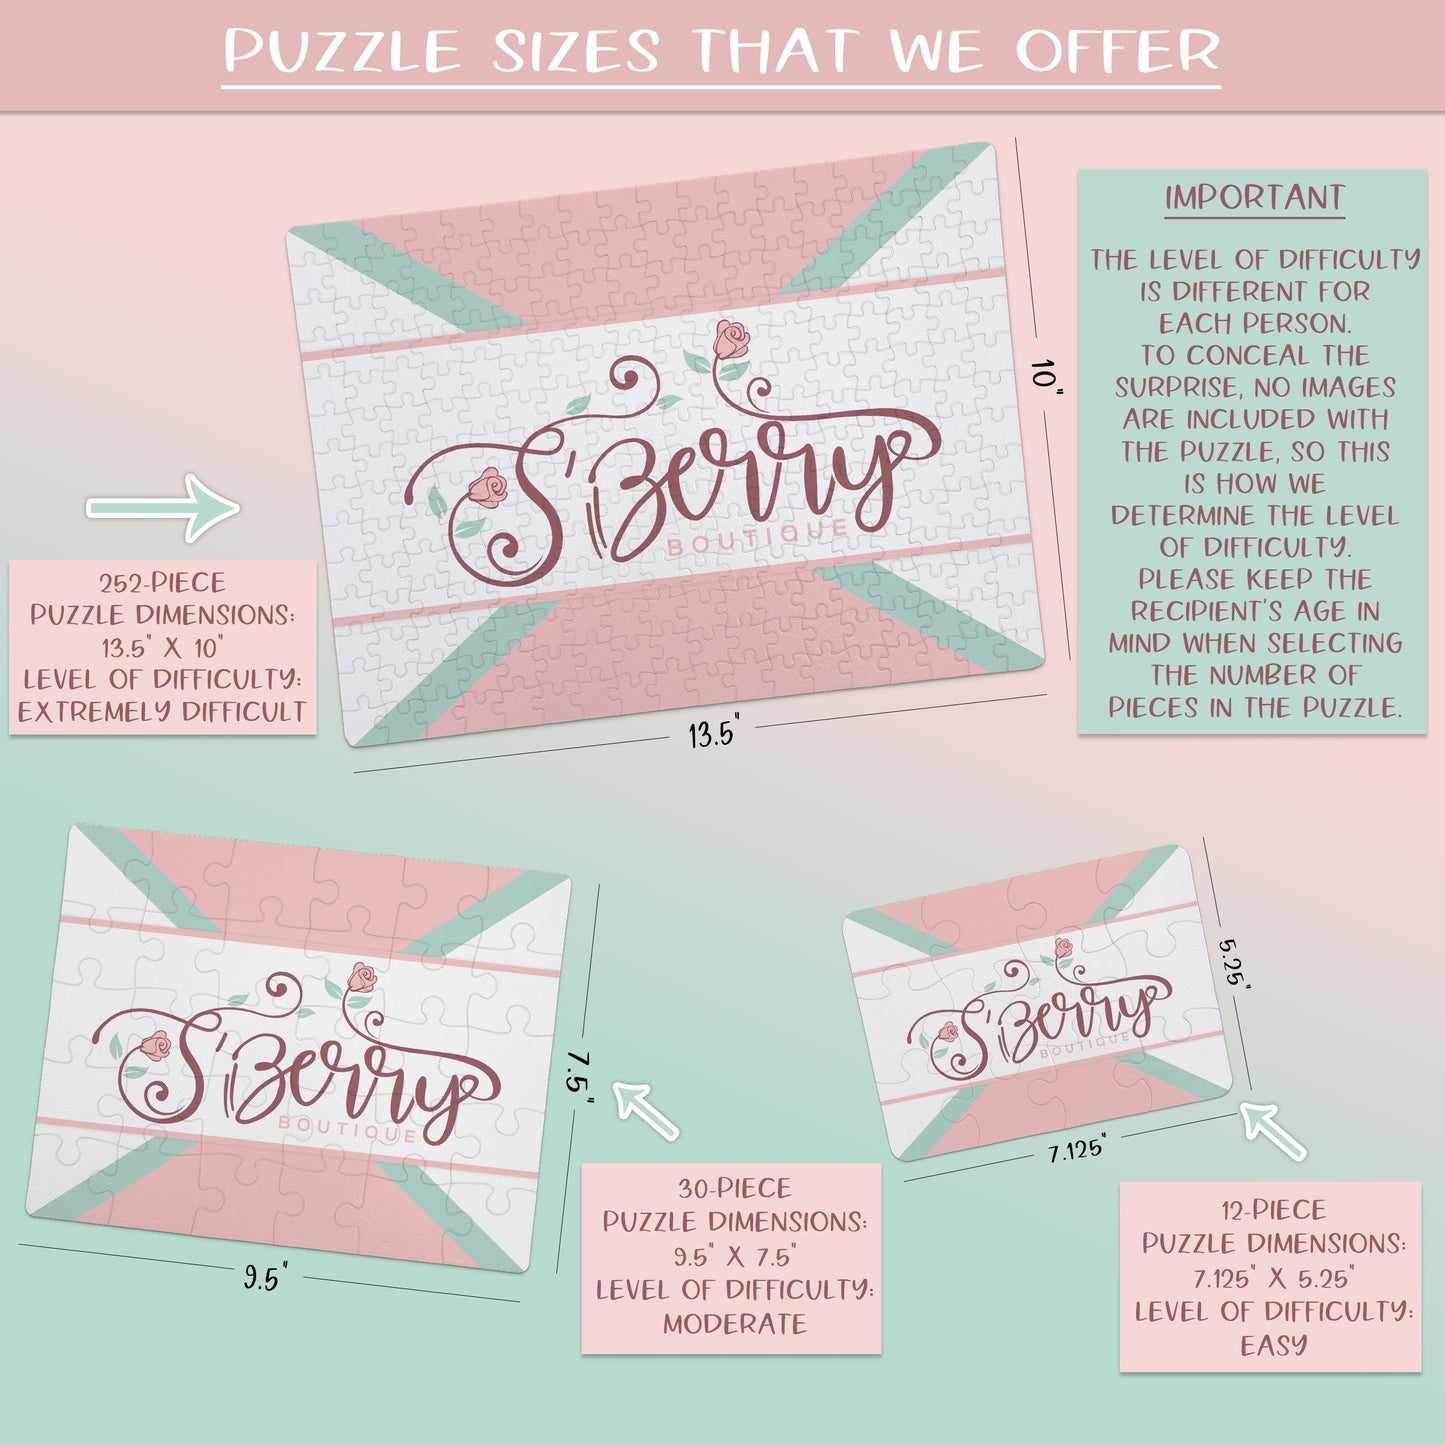 Create Your Own Puzzle - Arrow Design - CYOP0237 | S'Berry Boutique